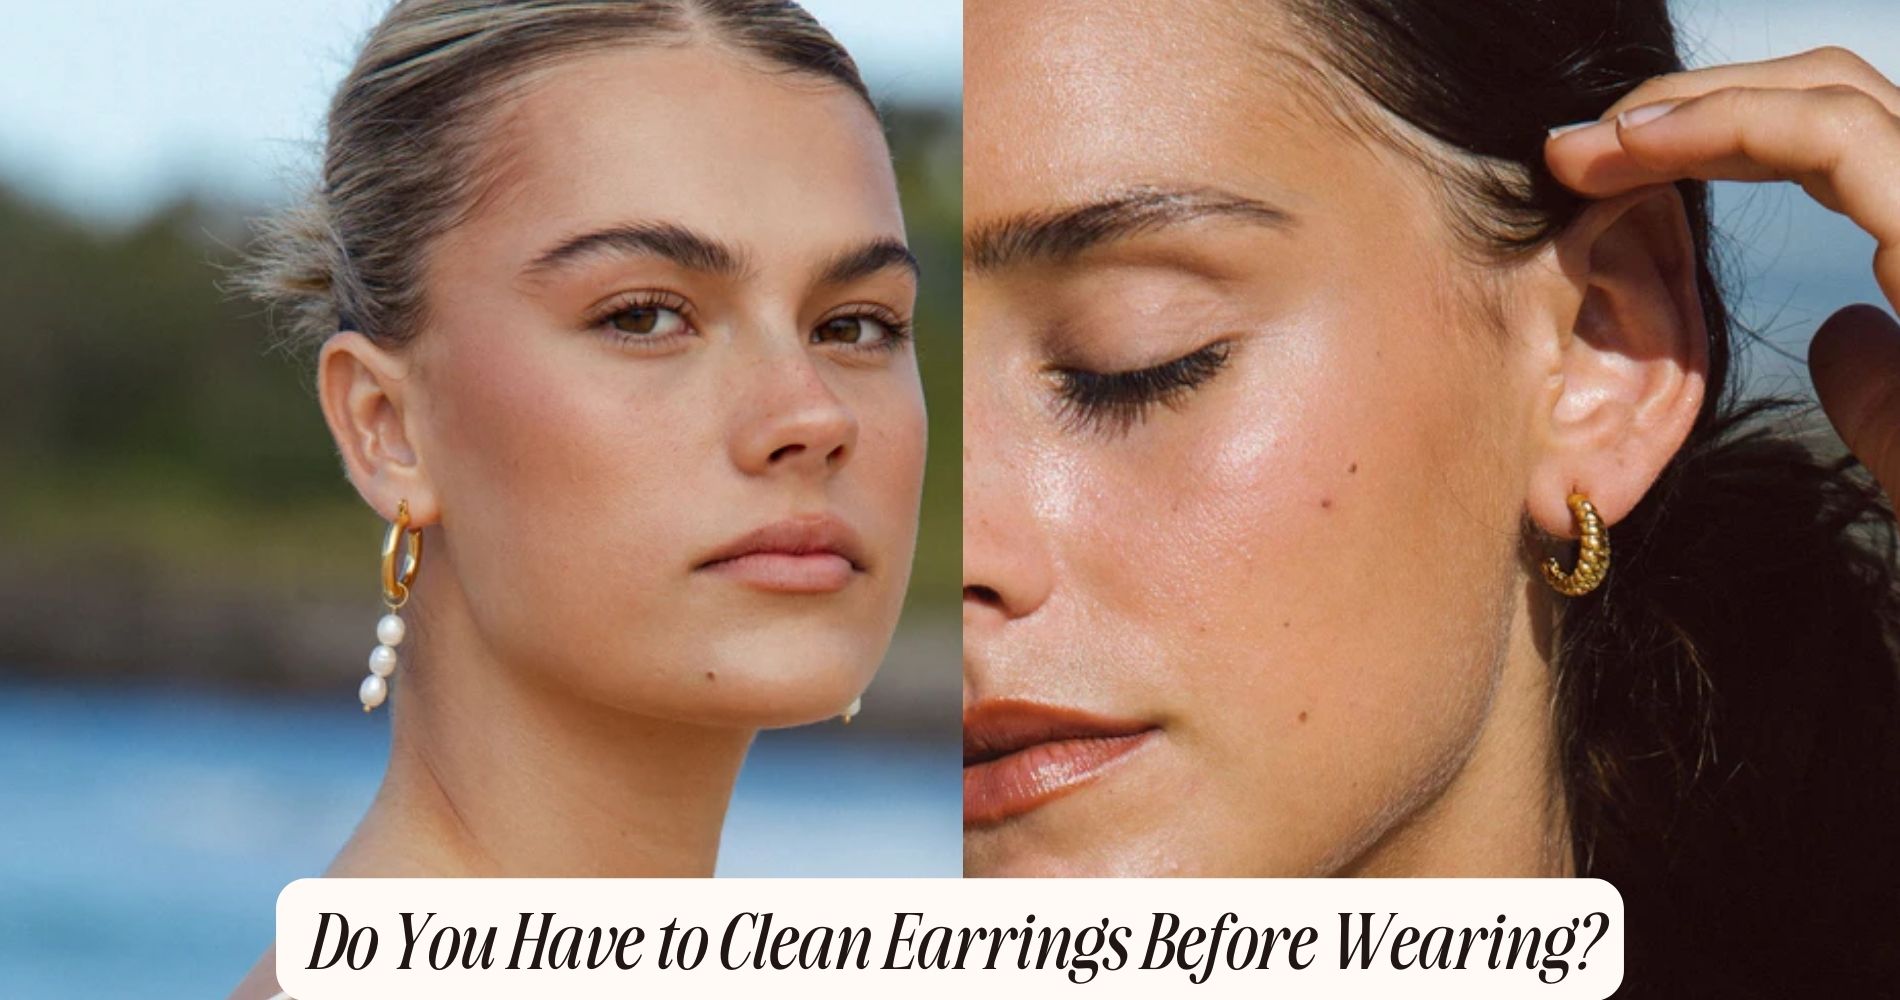 do you have to clean earrings before wearing them